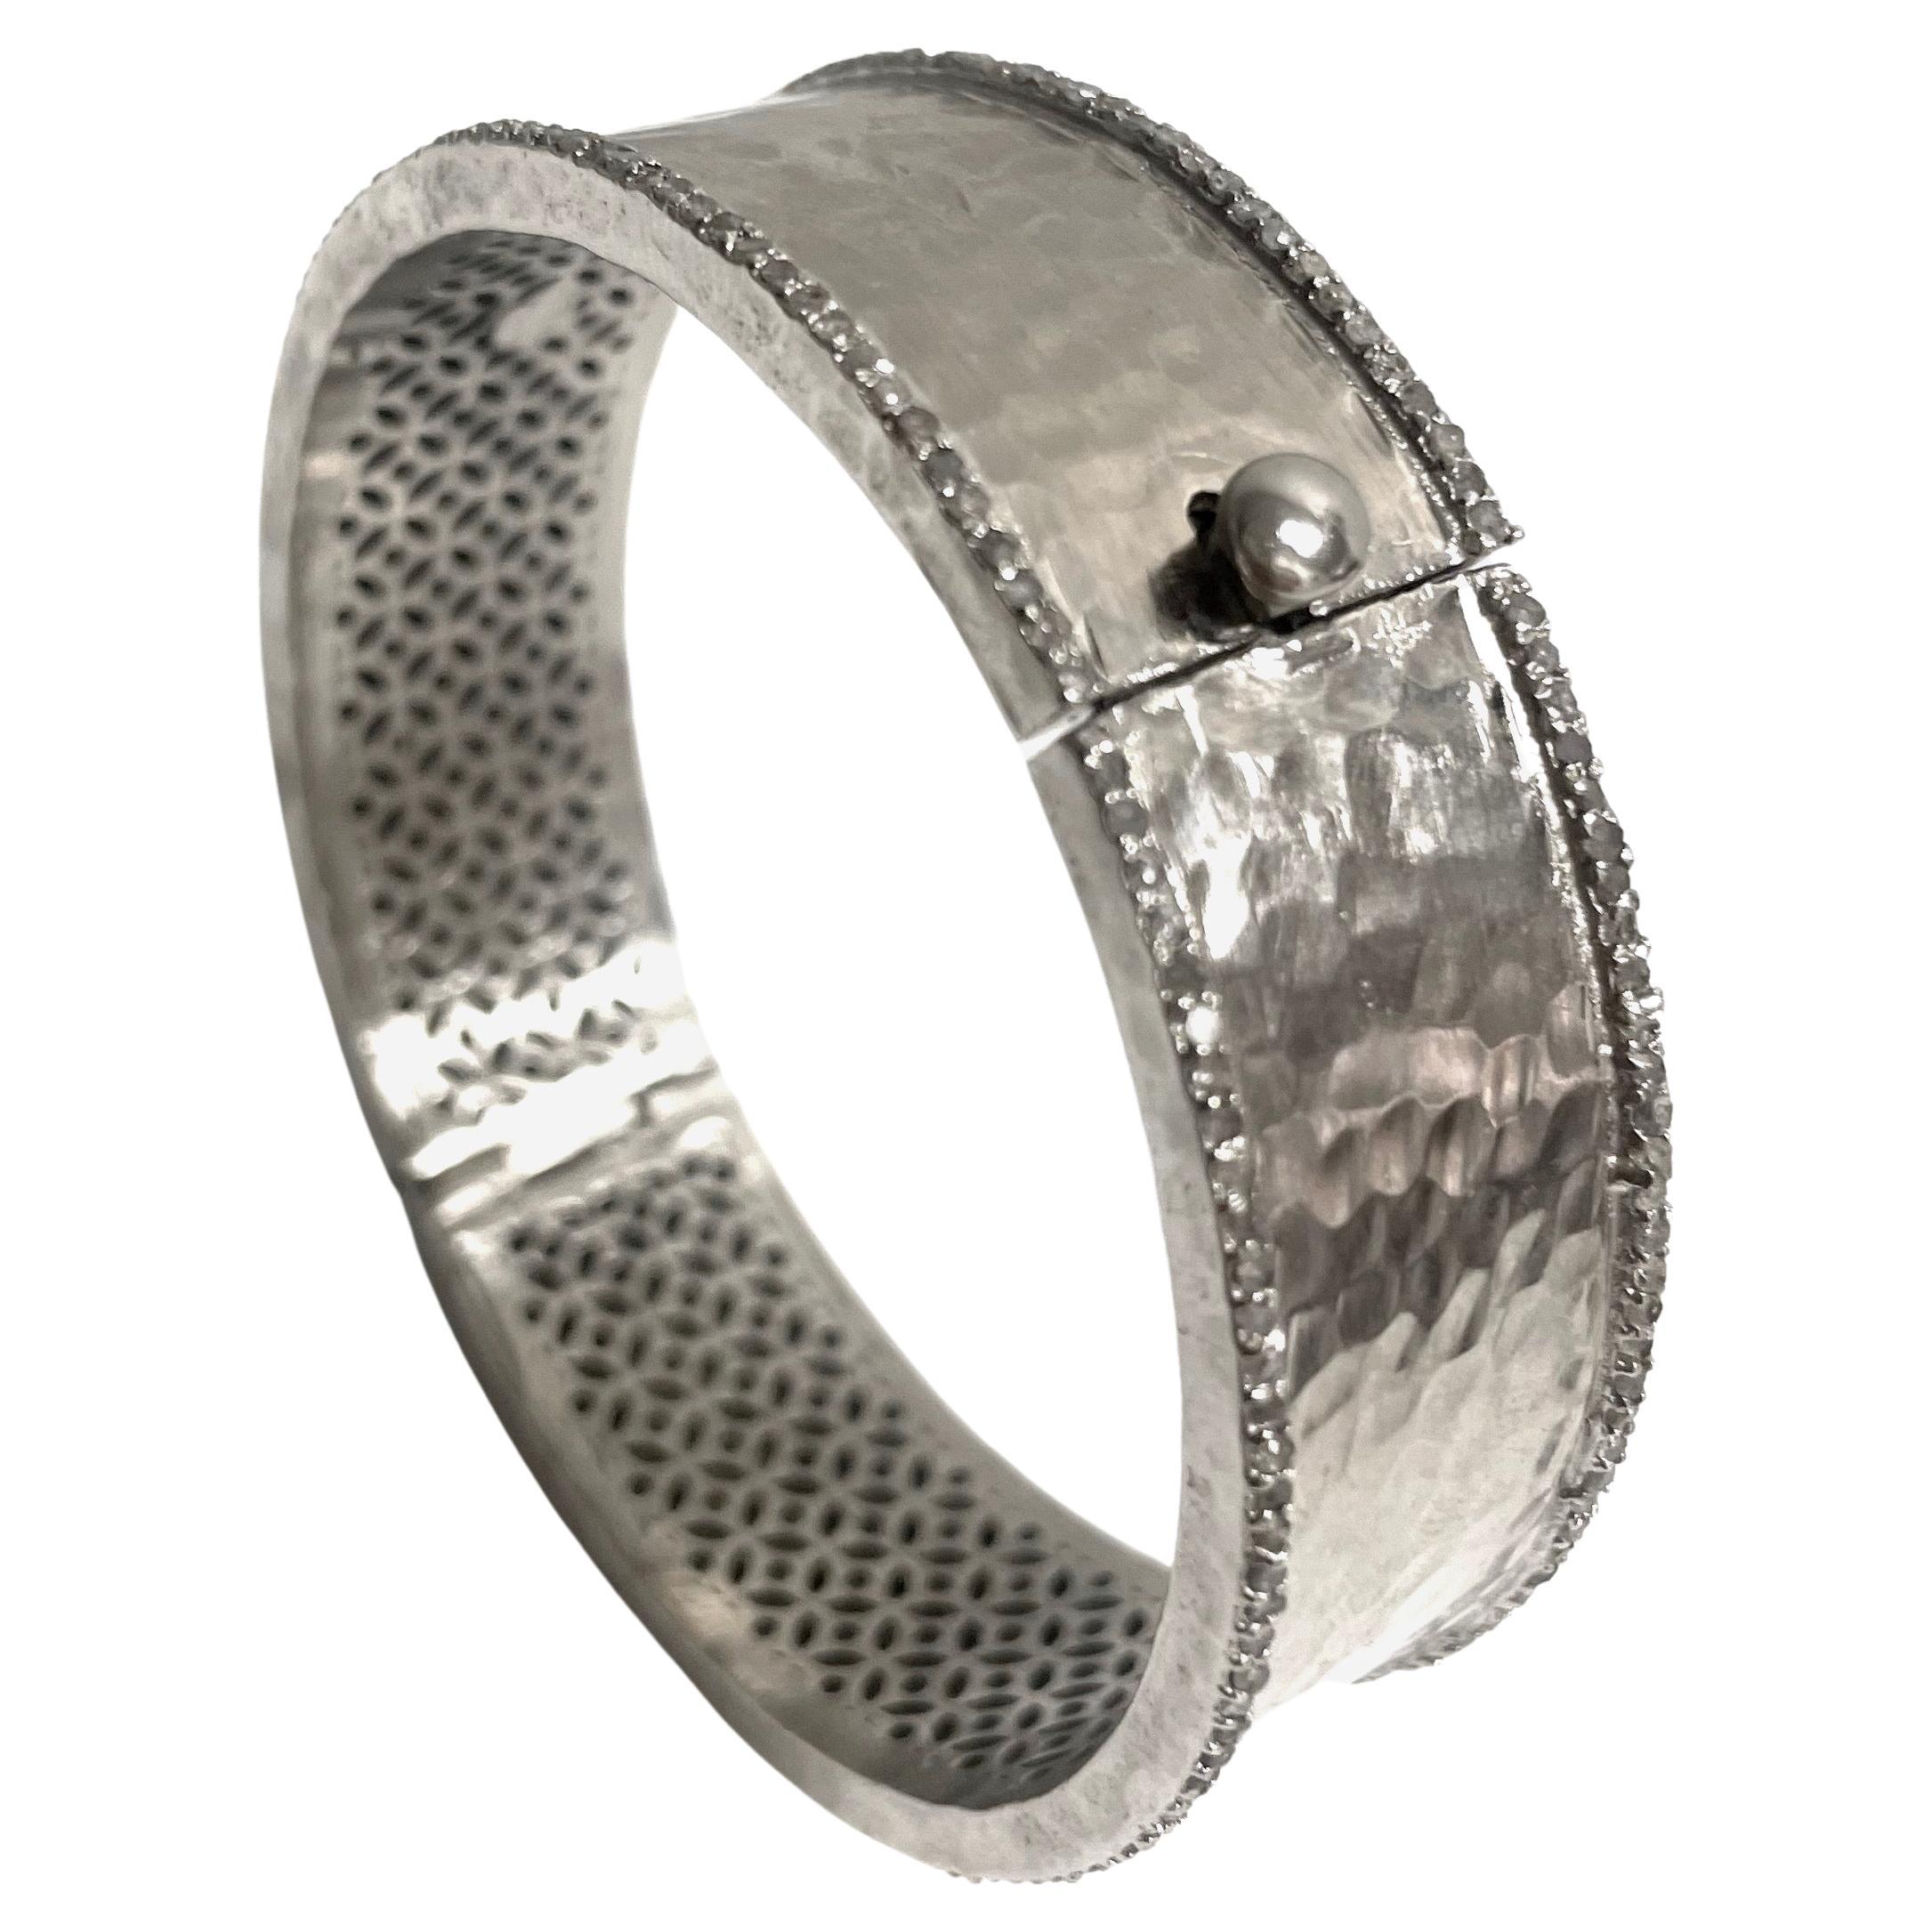 Description
Your elegance interlaced with your edgy style is echoed in this striking sterling silver bangle bracelet embellished with 6.30 carats of pave diamonds. Hammered by hand to create dazzling reflections when catching the light, it is sure